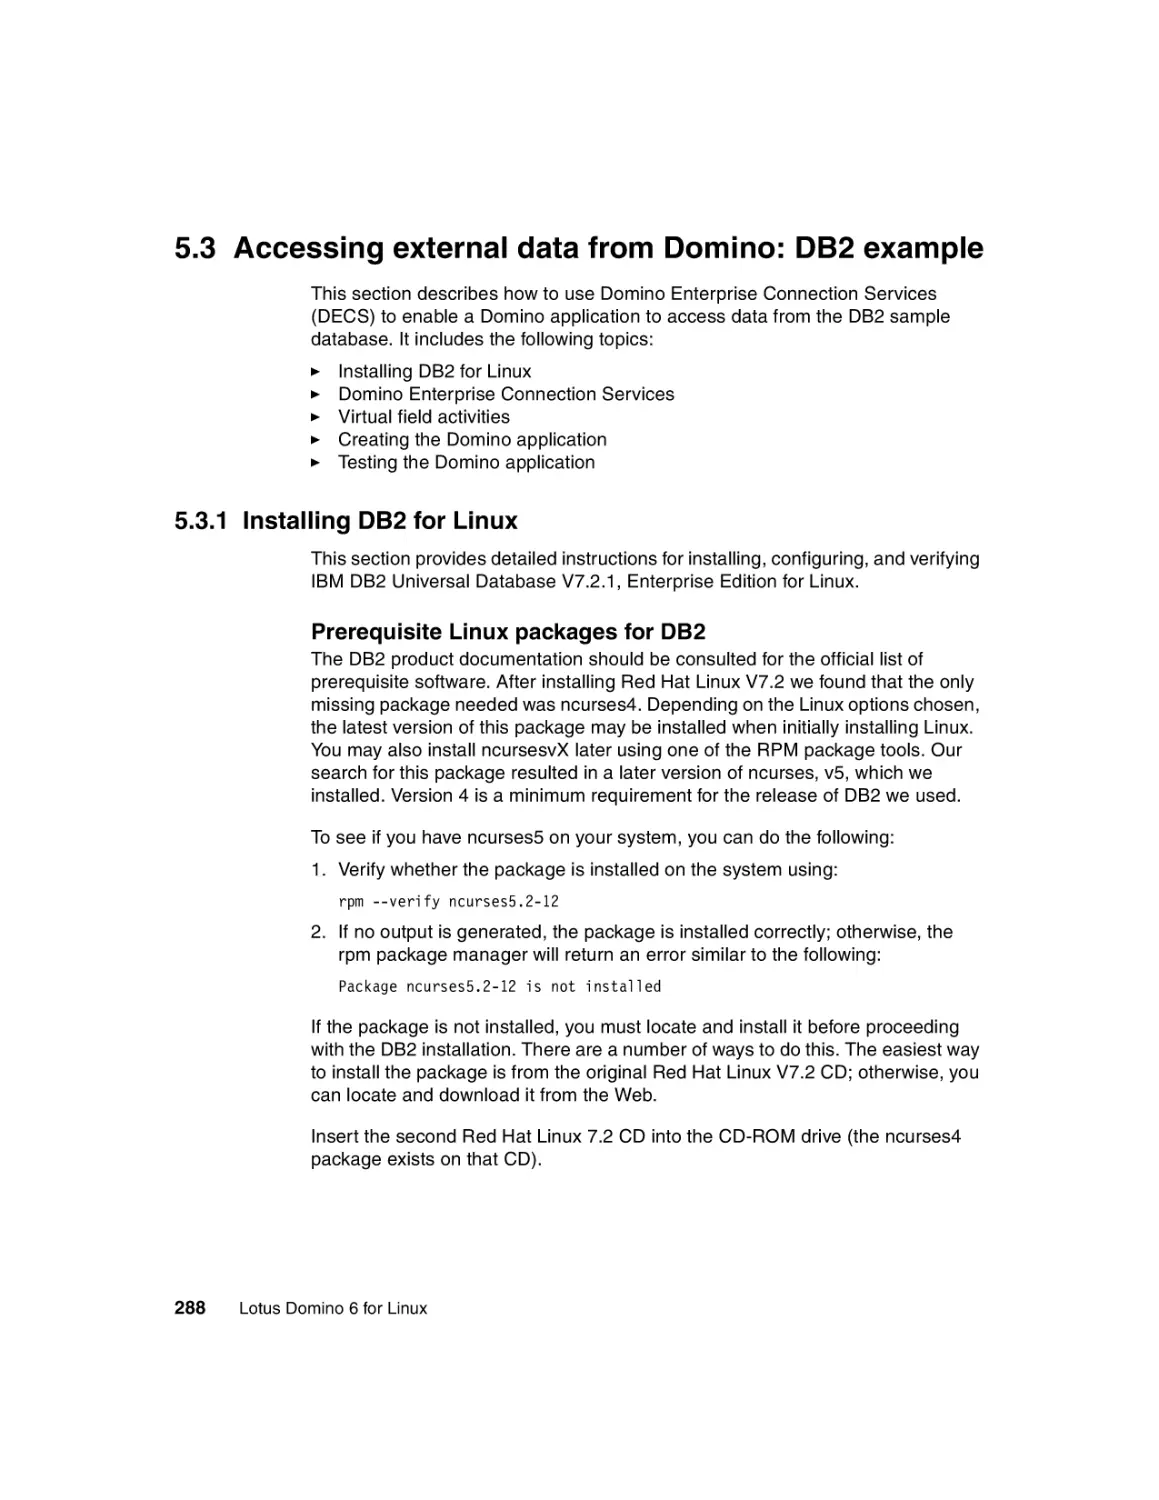 5.3 Accessing external data from Domino
5.3.1 Installing DB2 for Linux